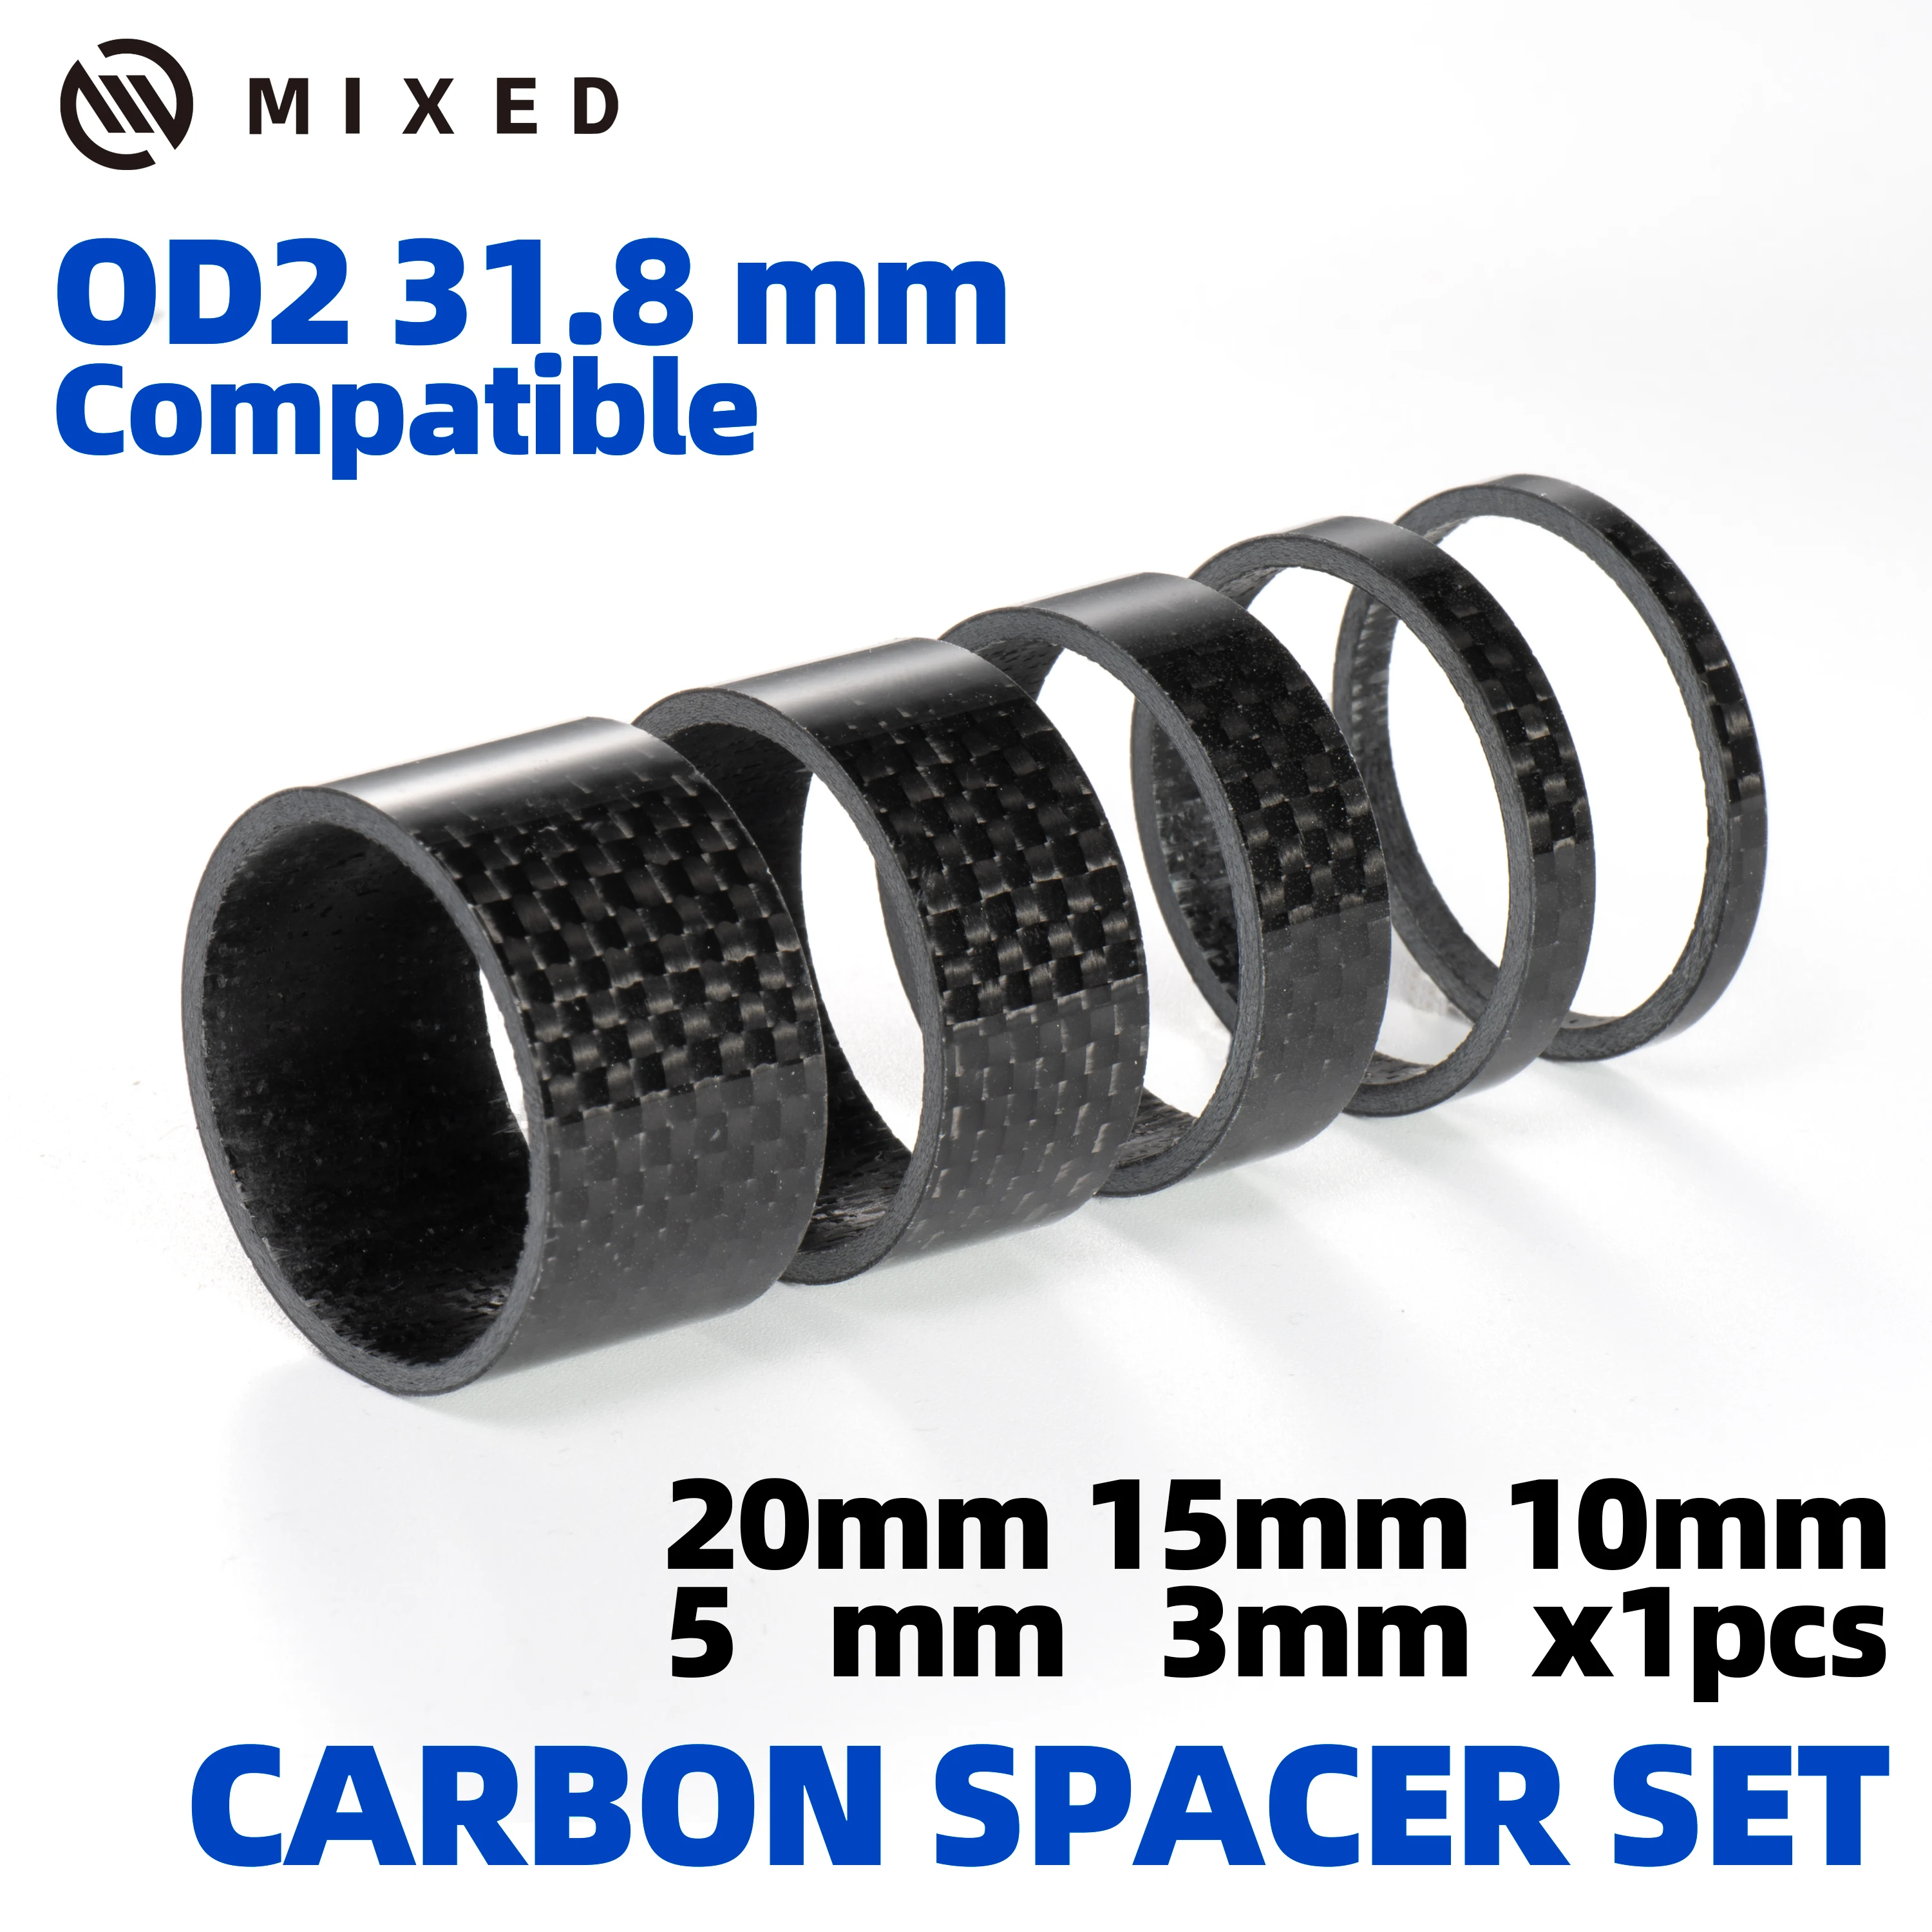 MIXED Full Carbon 28.6/31.8mm Bicycle Spacer Ultra Light Parts Cycling Washer Bike Headset Stem Spacers